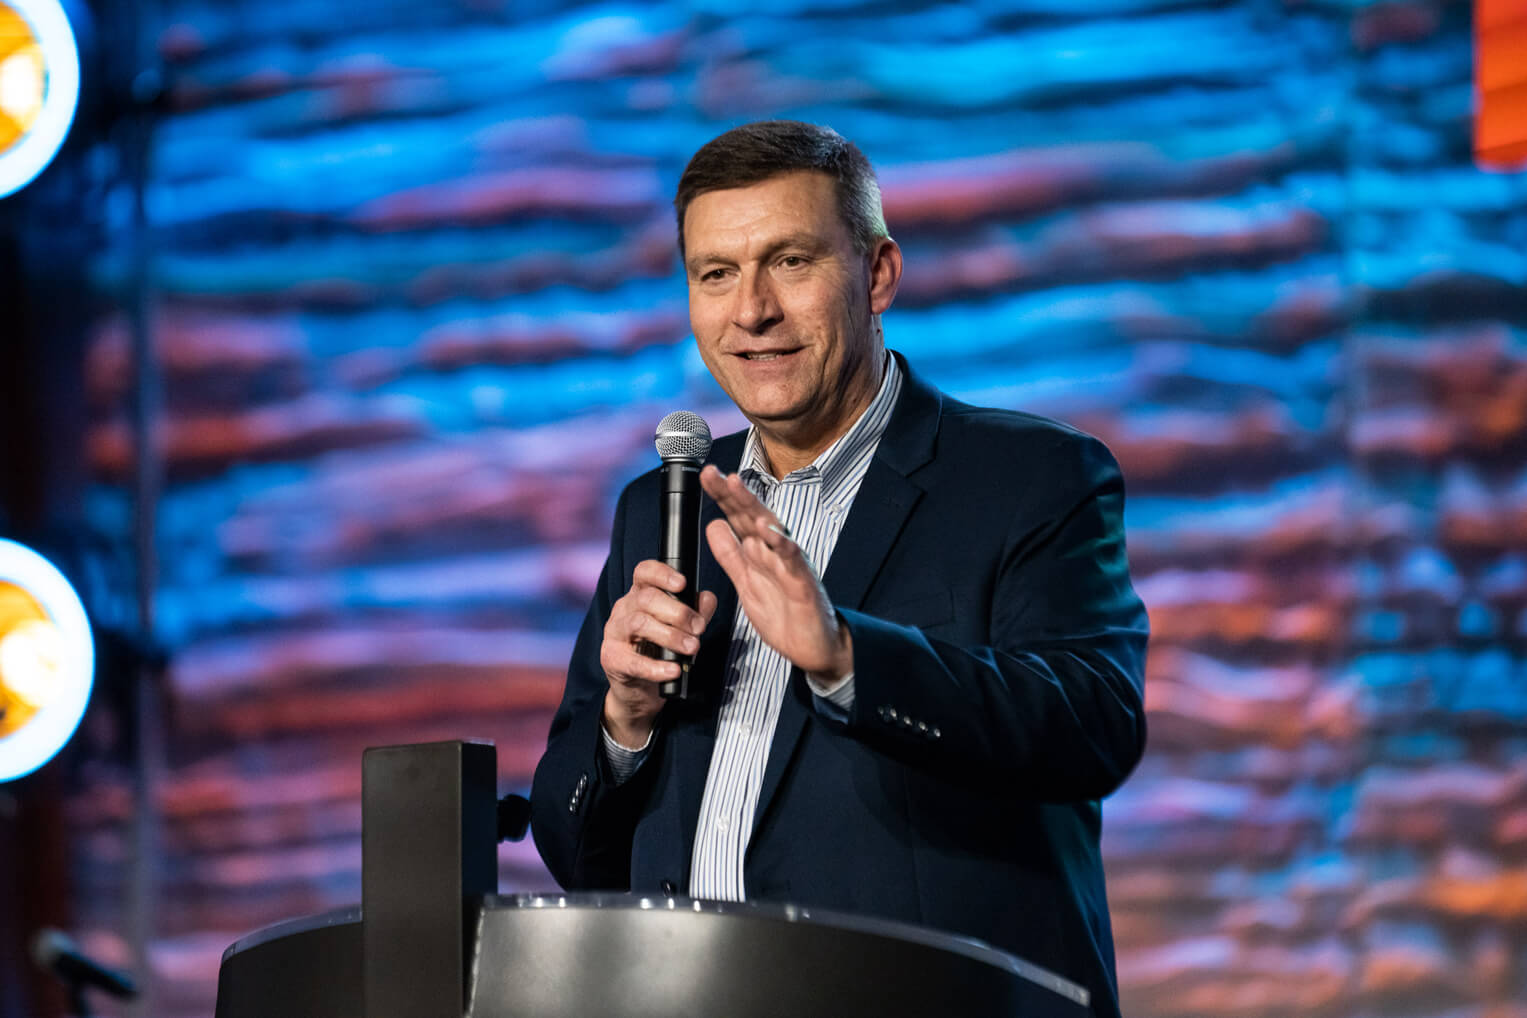 Luther Harrison, vice president of North American Ministries for Samaritan's Purse, encouraged attendees to share the Gospel of Jesus Christ without fear or compromise.